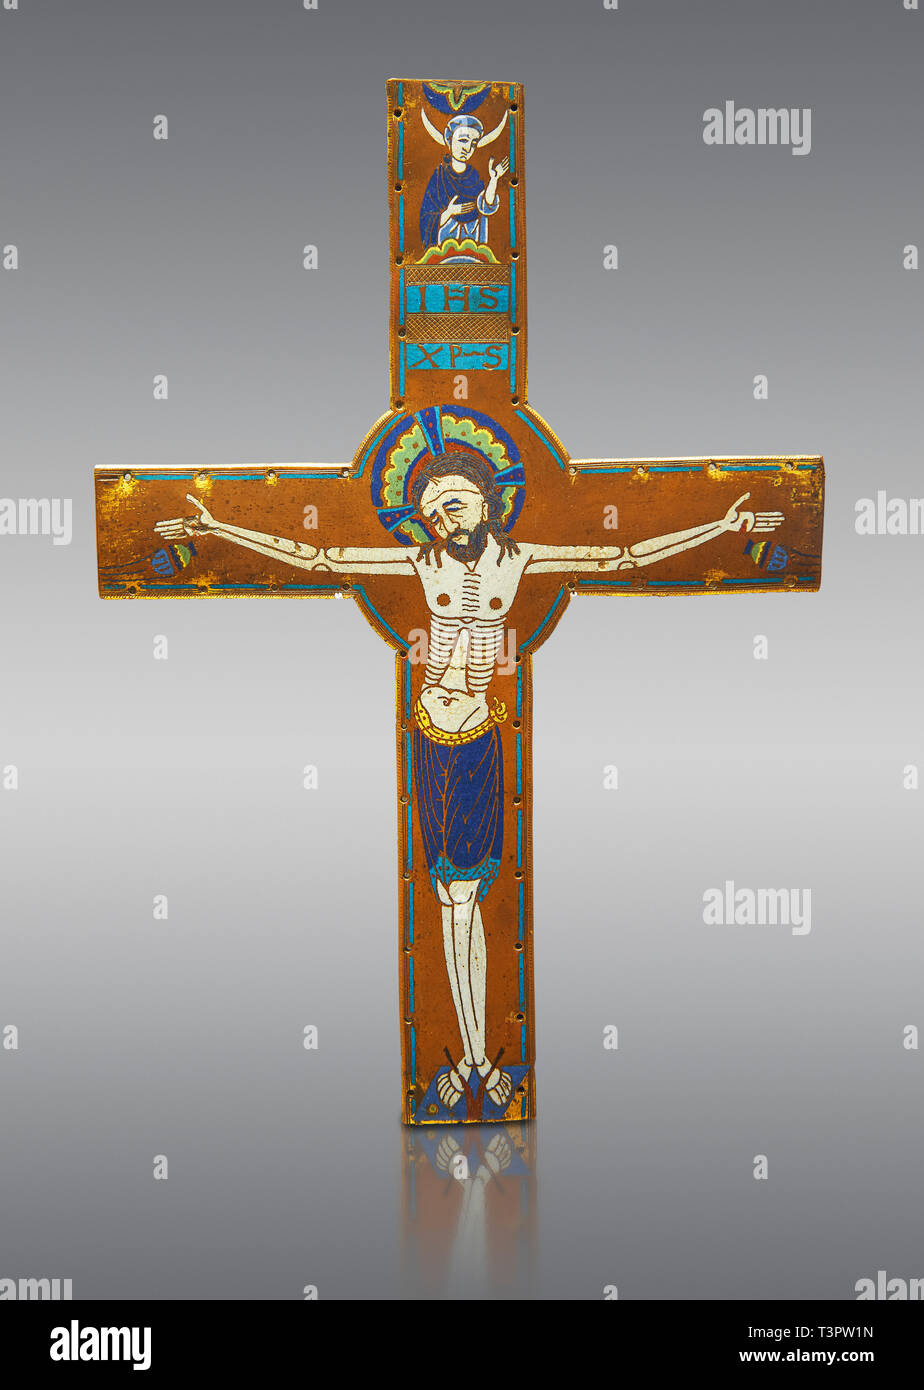 Medieval enamelled crucifix, circa end of 12th century from Limoges, enamel on gold. AD. Inv OA 2956, The Louvre Museum, Paris. Stock Photo